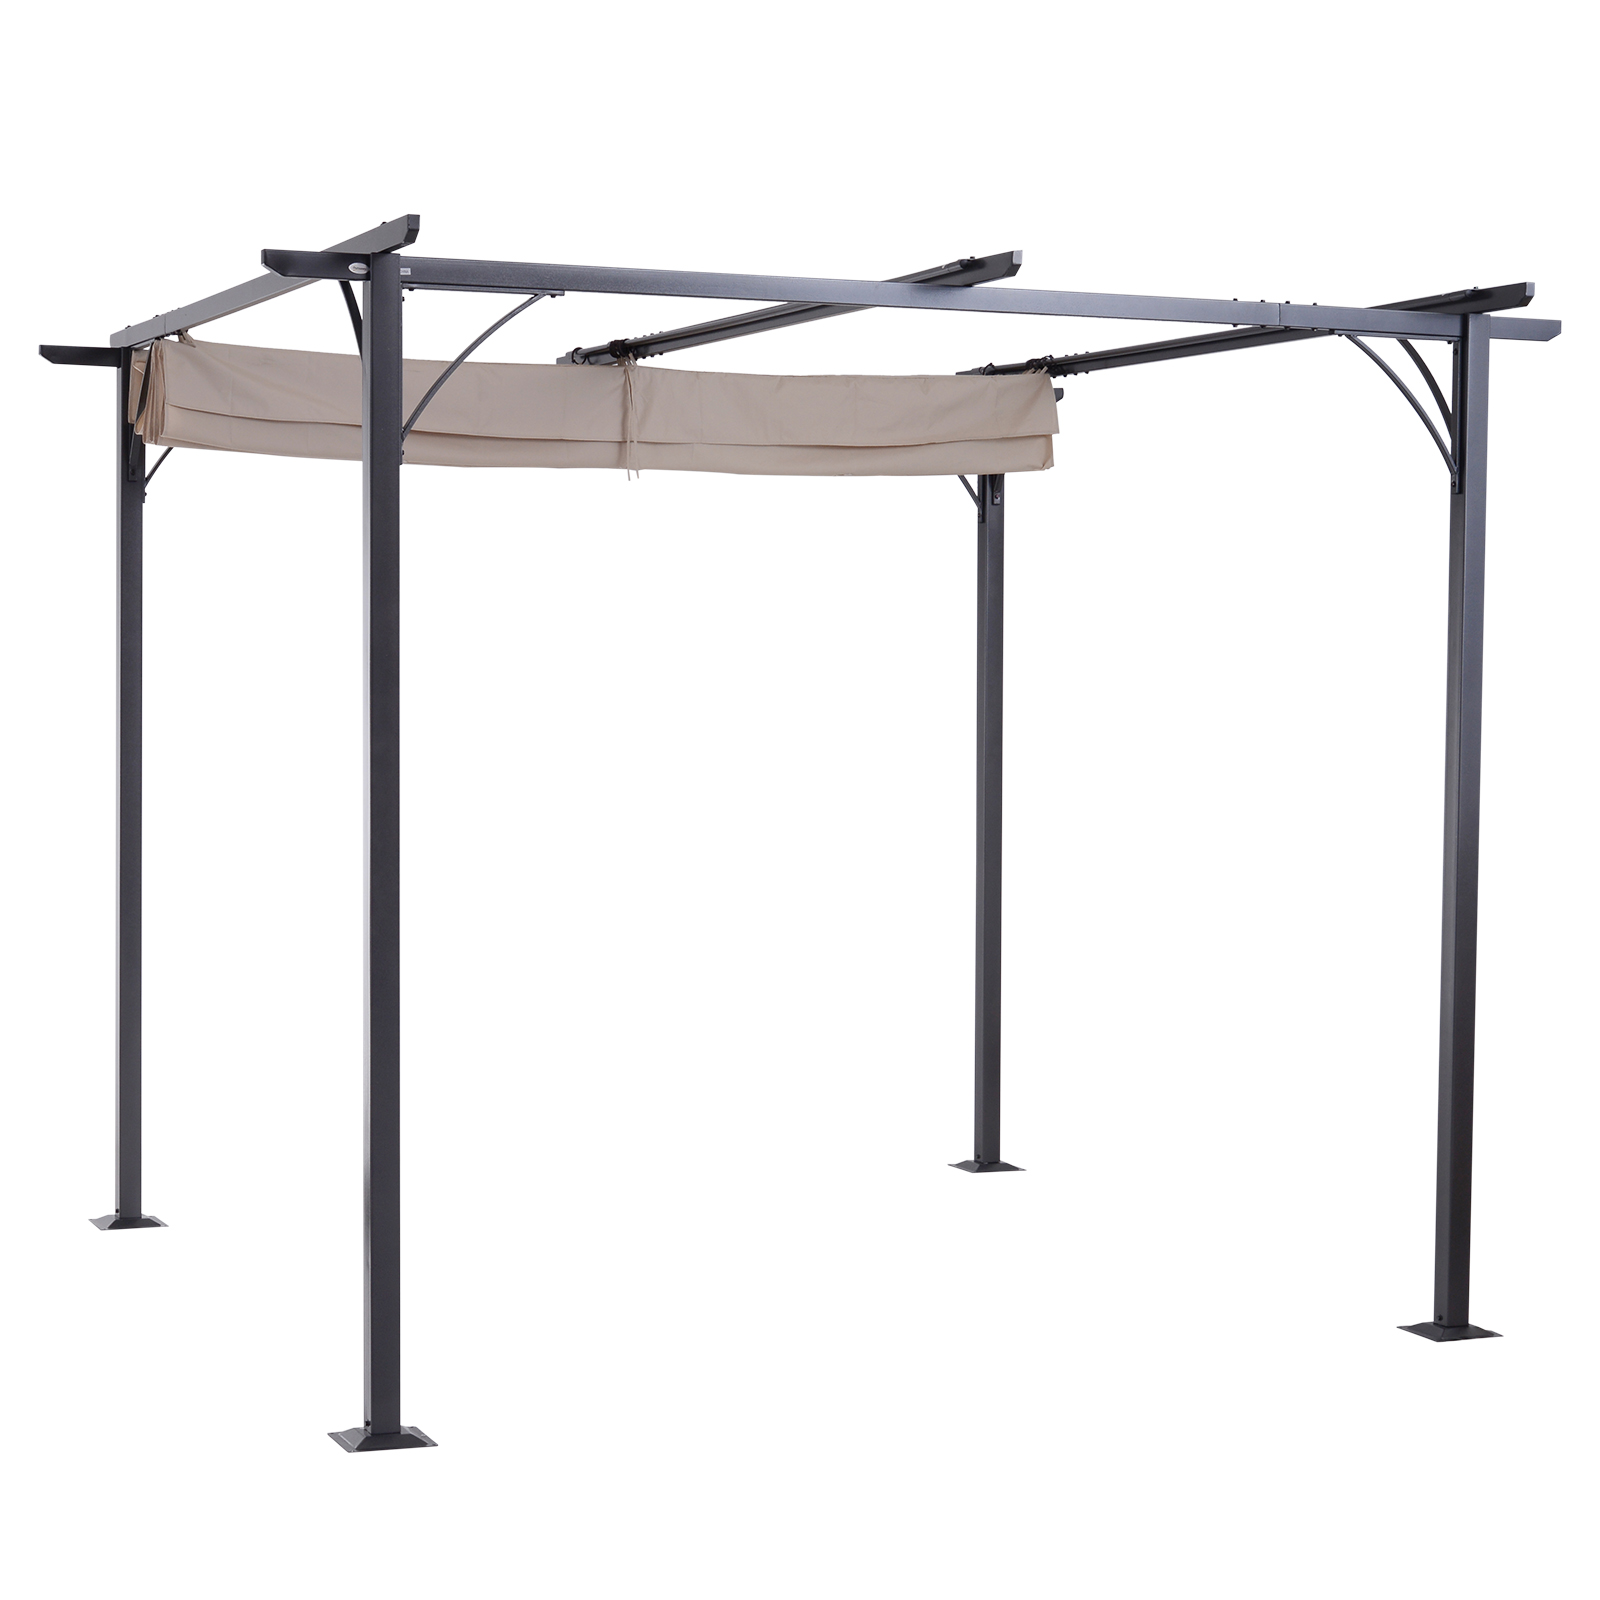 Outsunny 10' x 10' x 7.5' Beige and Black Polyester and Steel Pergola - image 4 of 10